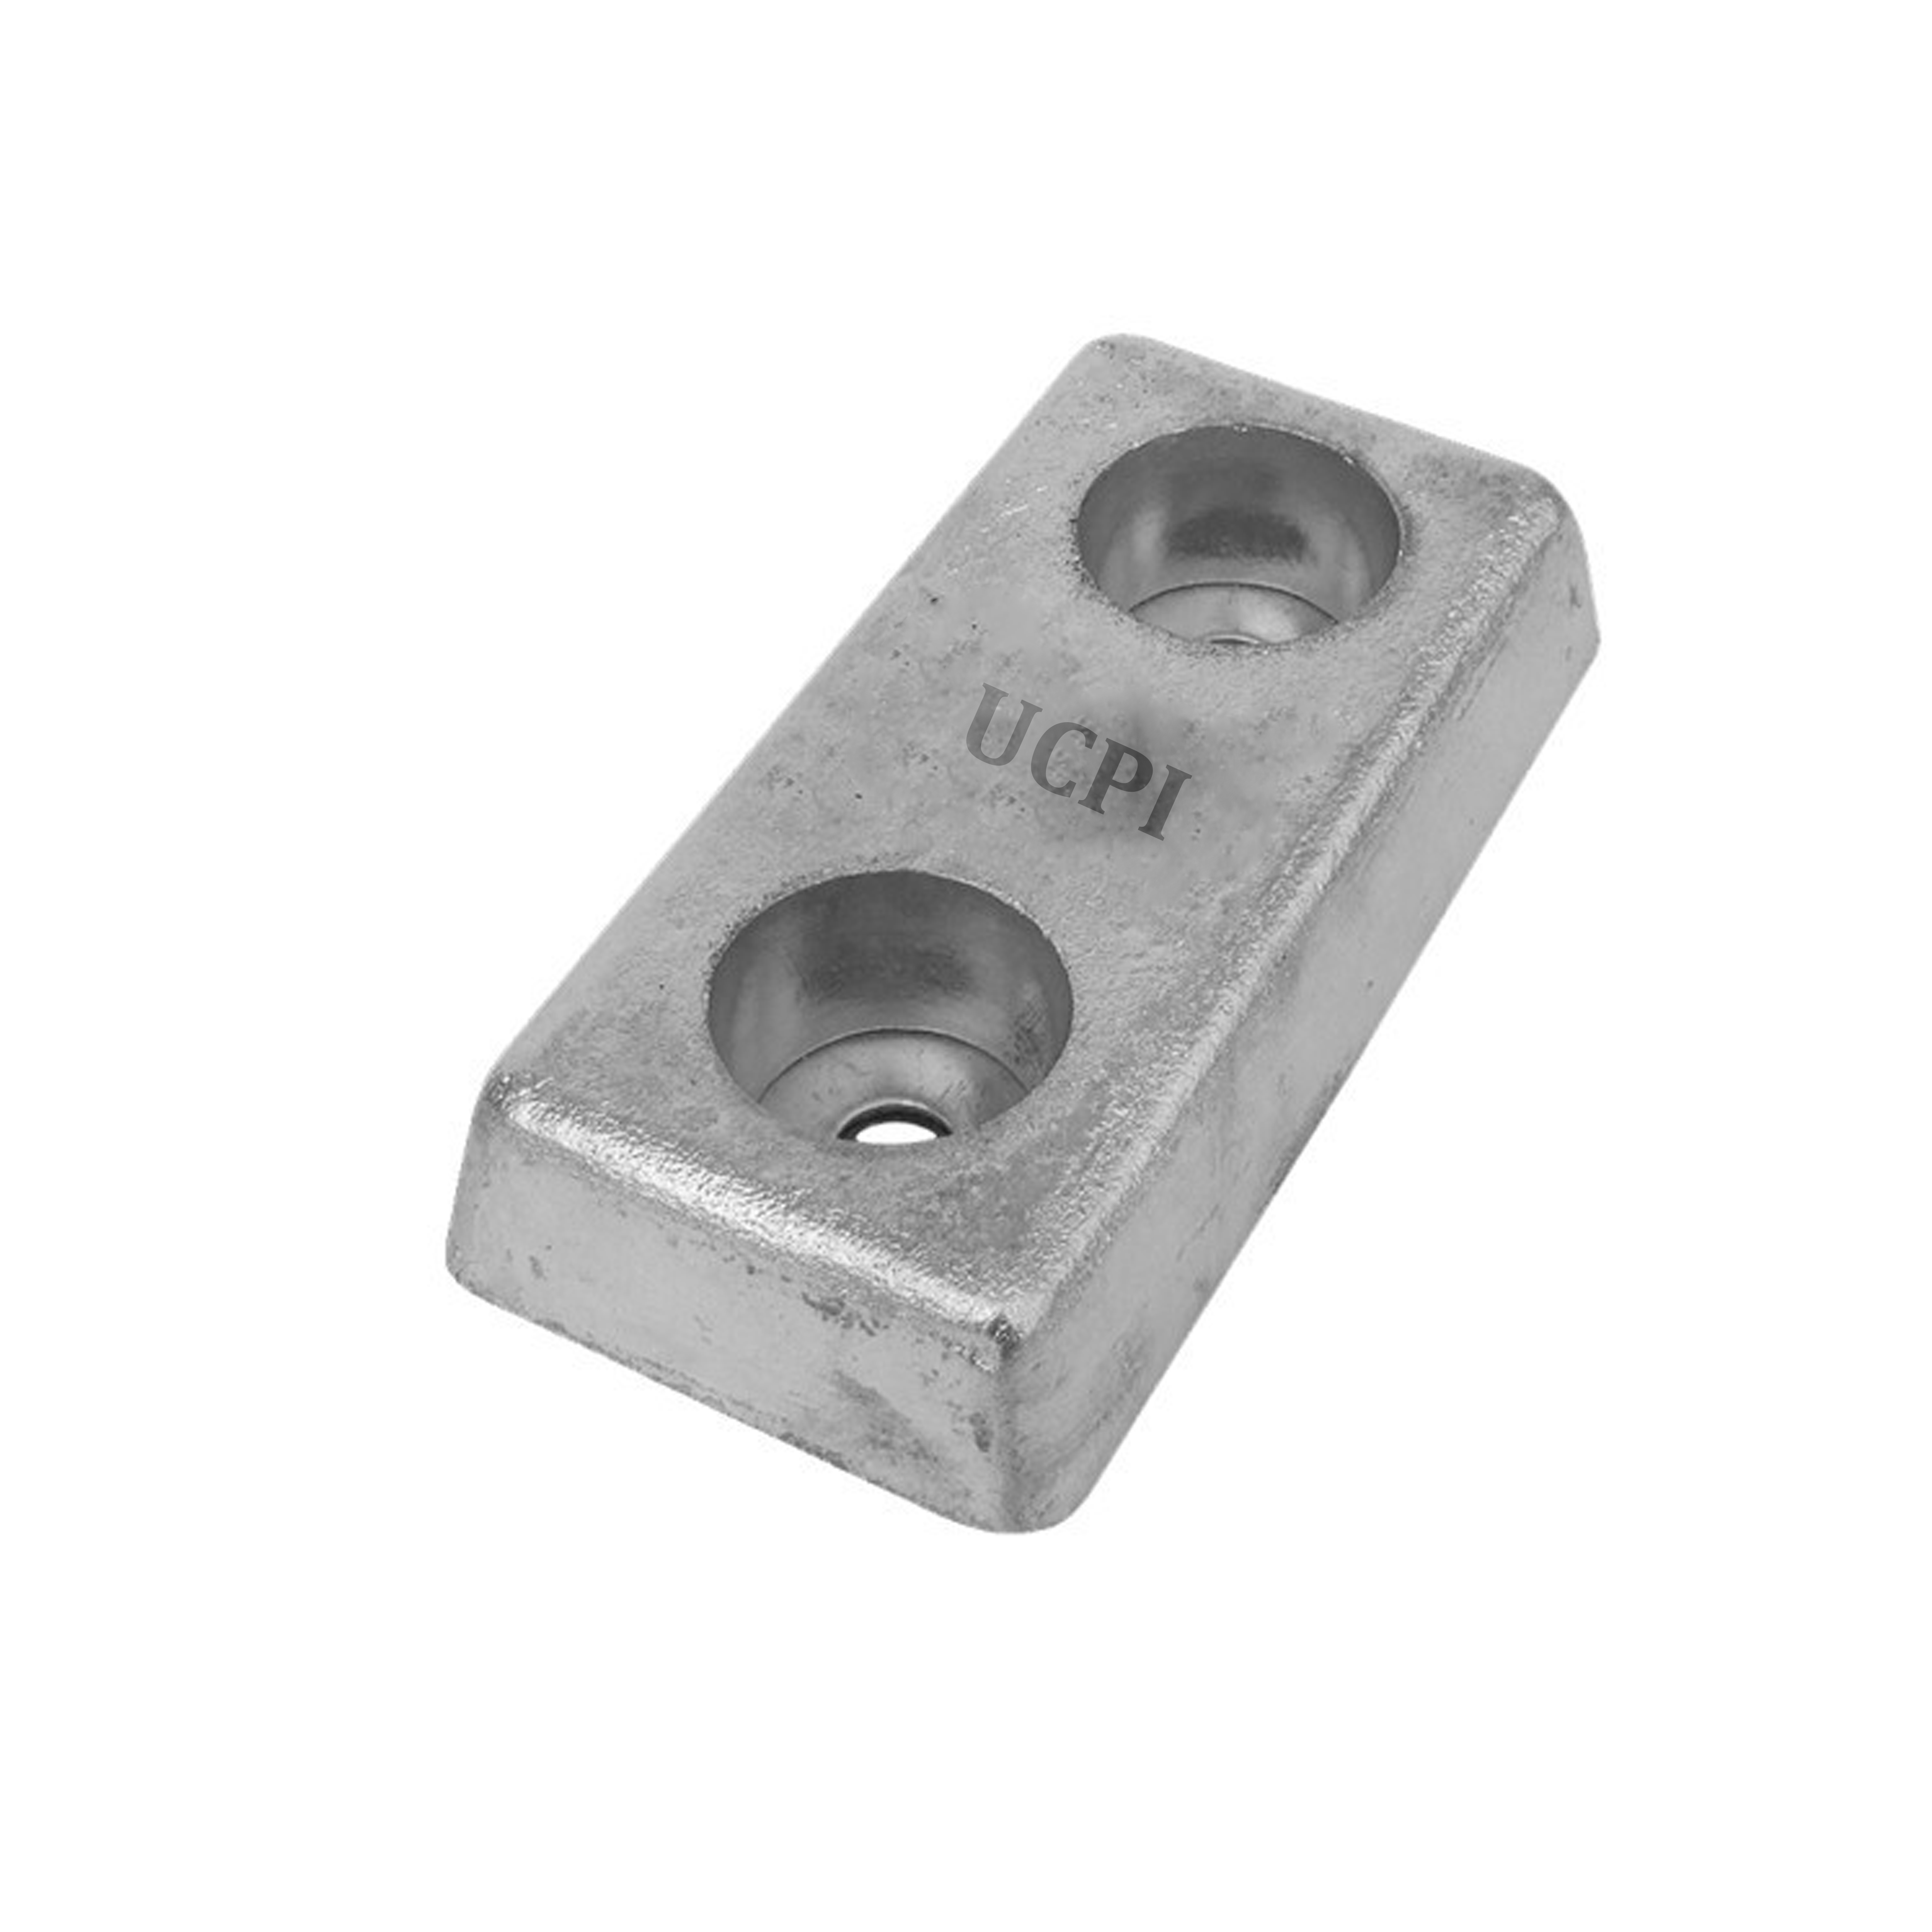 Zinc Hull Anode | Product | Universal Corrosion Prevention India (UCPI)